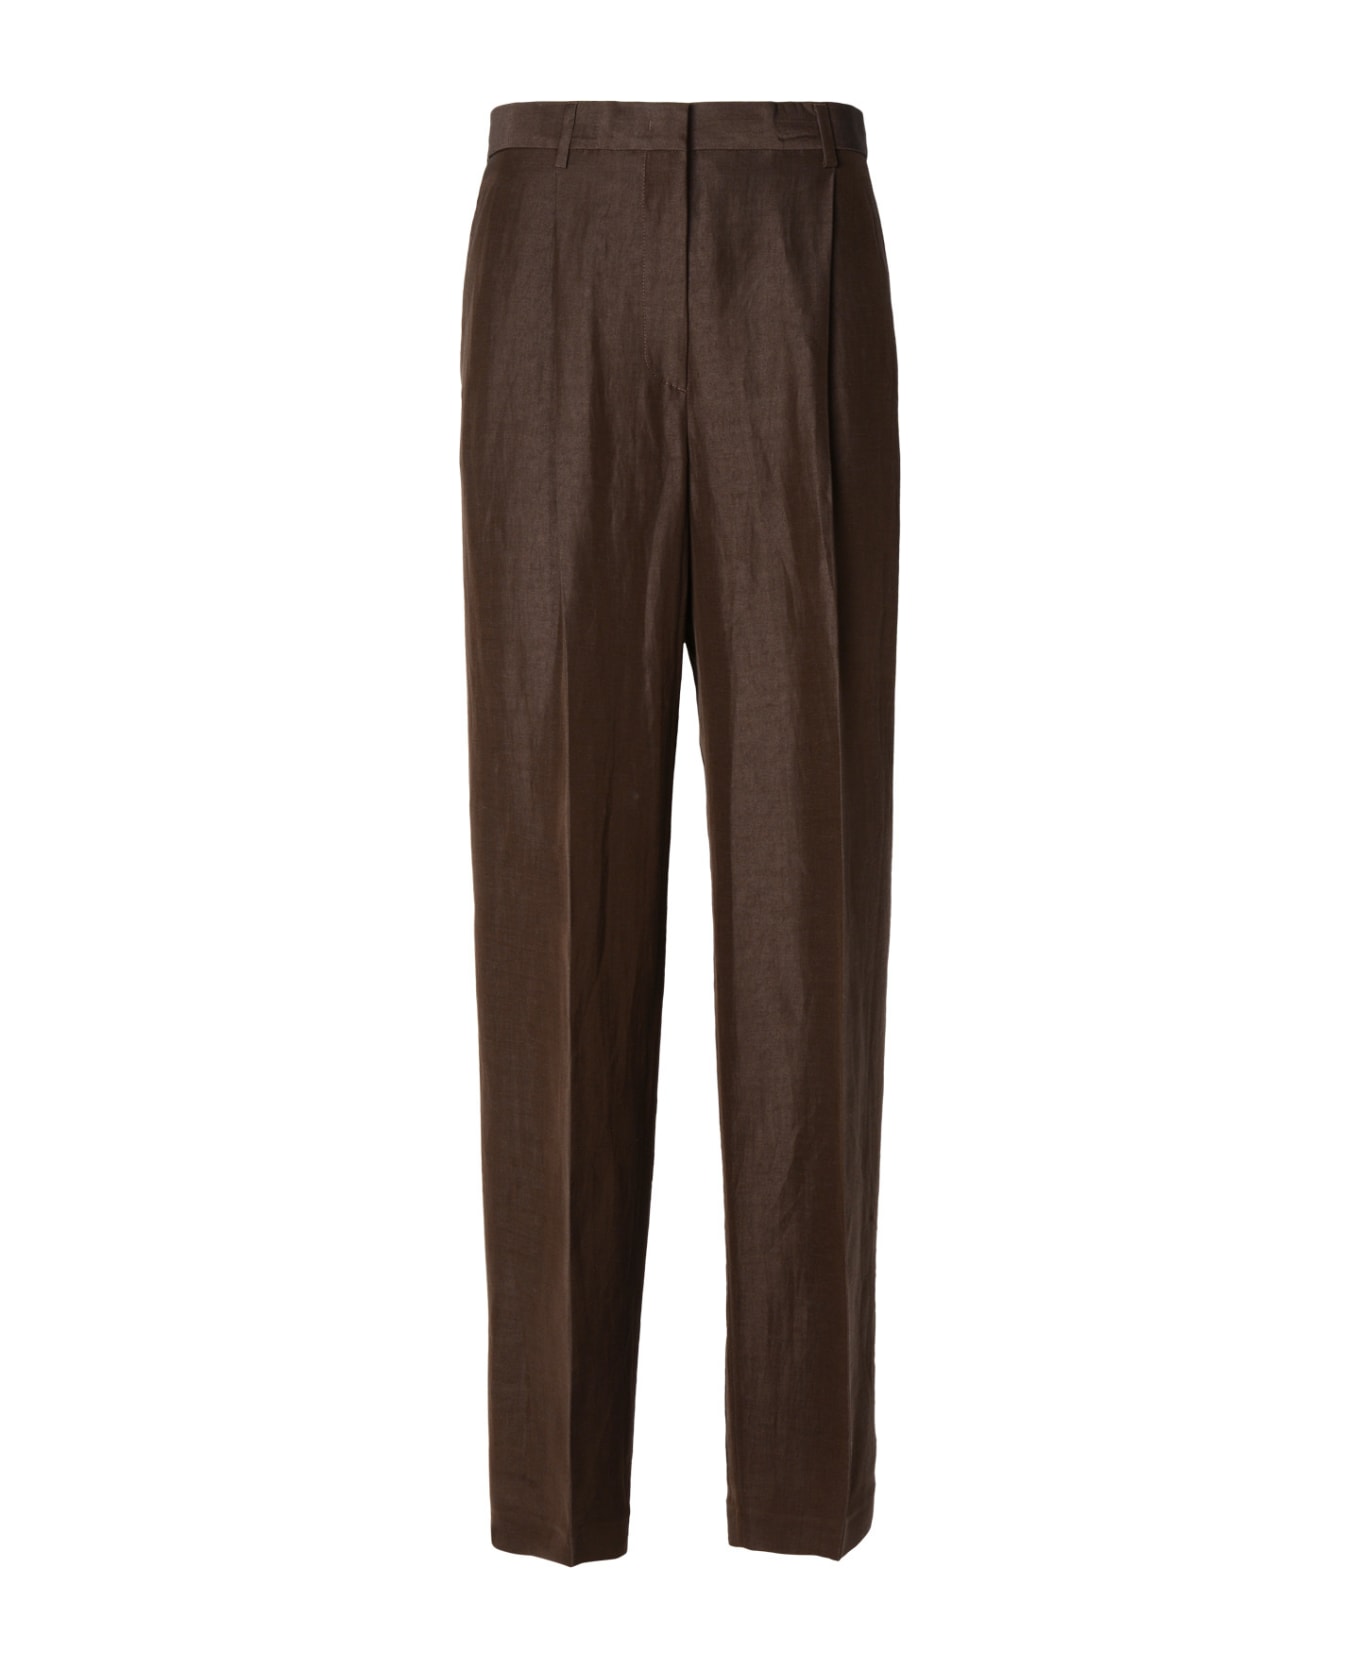 MSGM Brown Linen Blend Trousers - Dark brown ボトムス